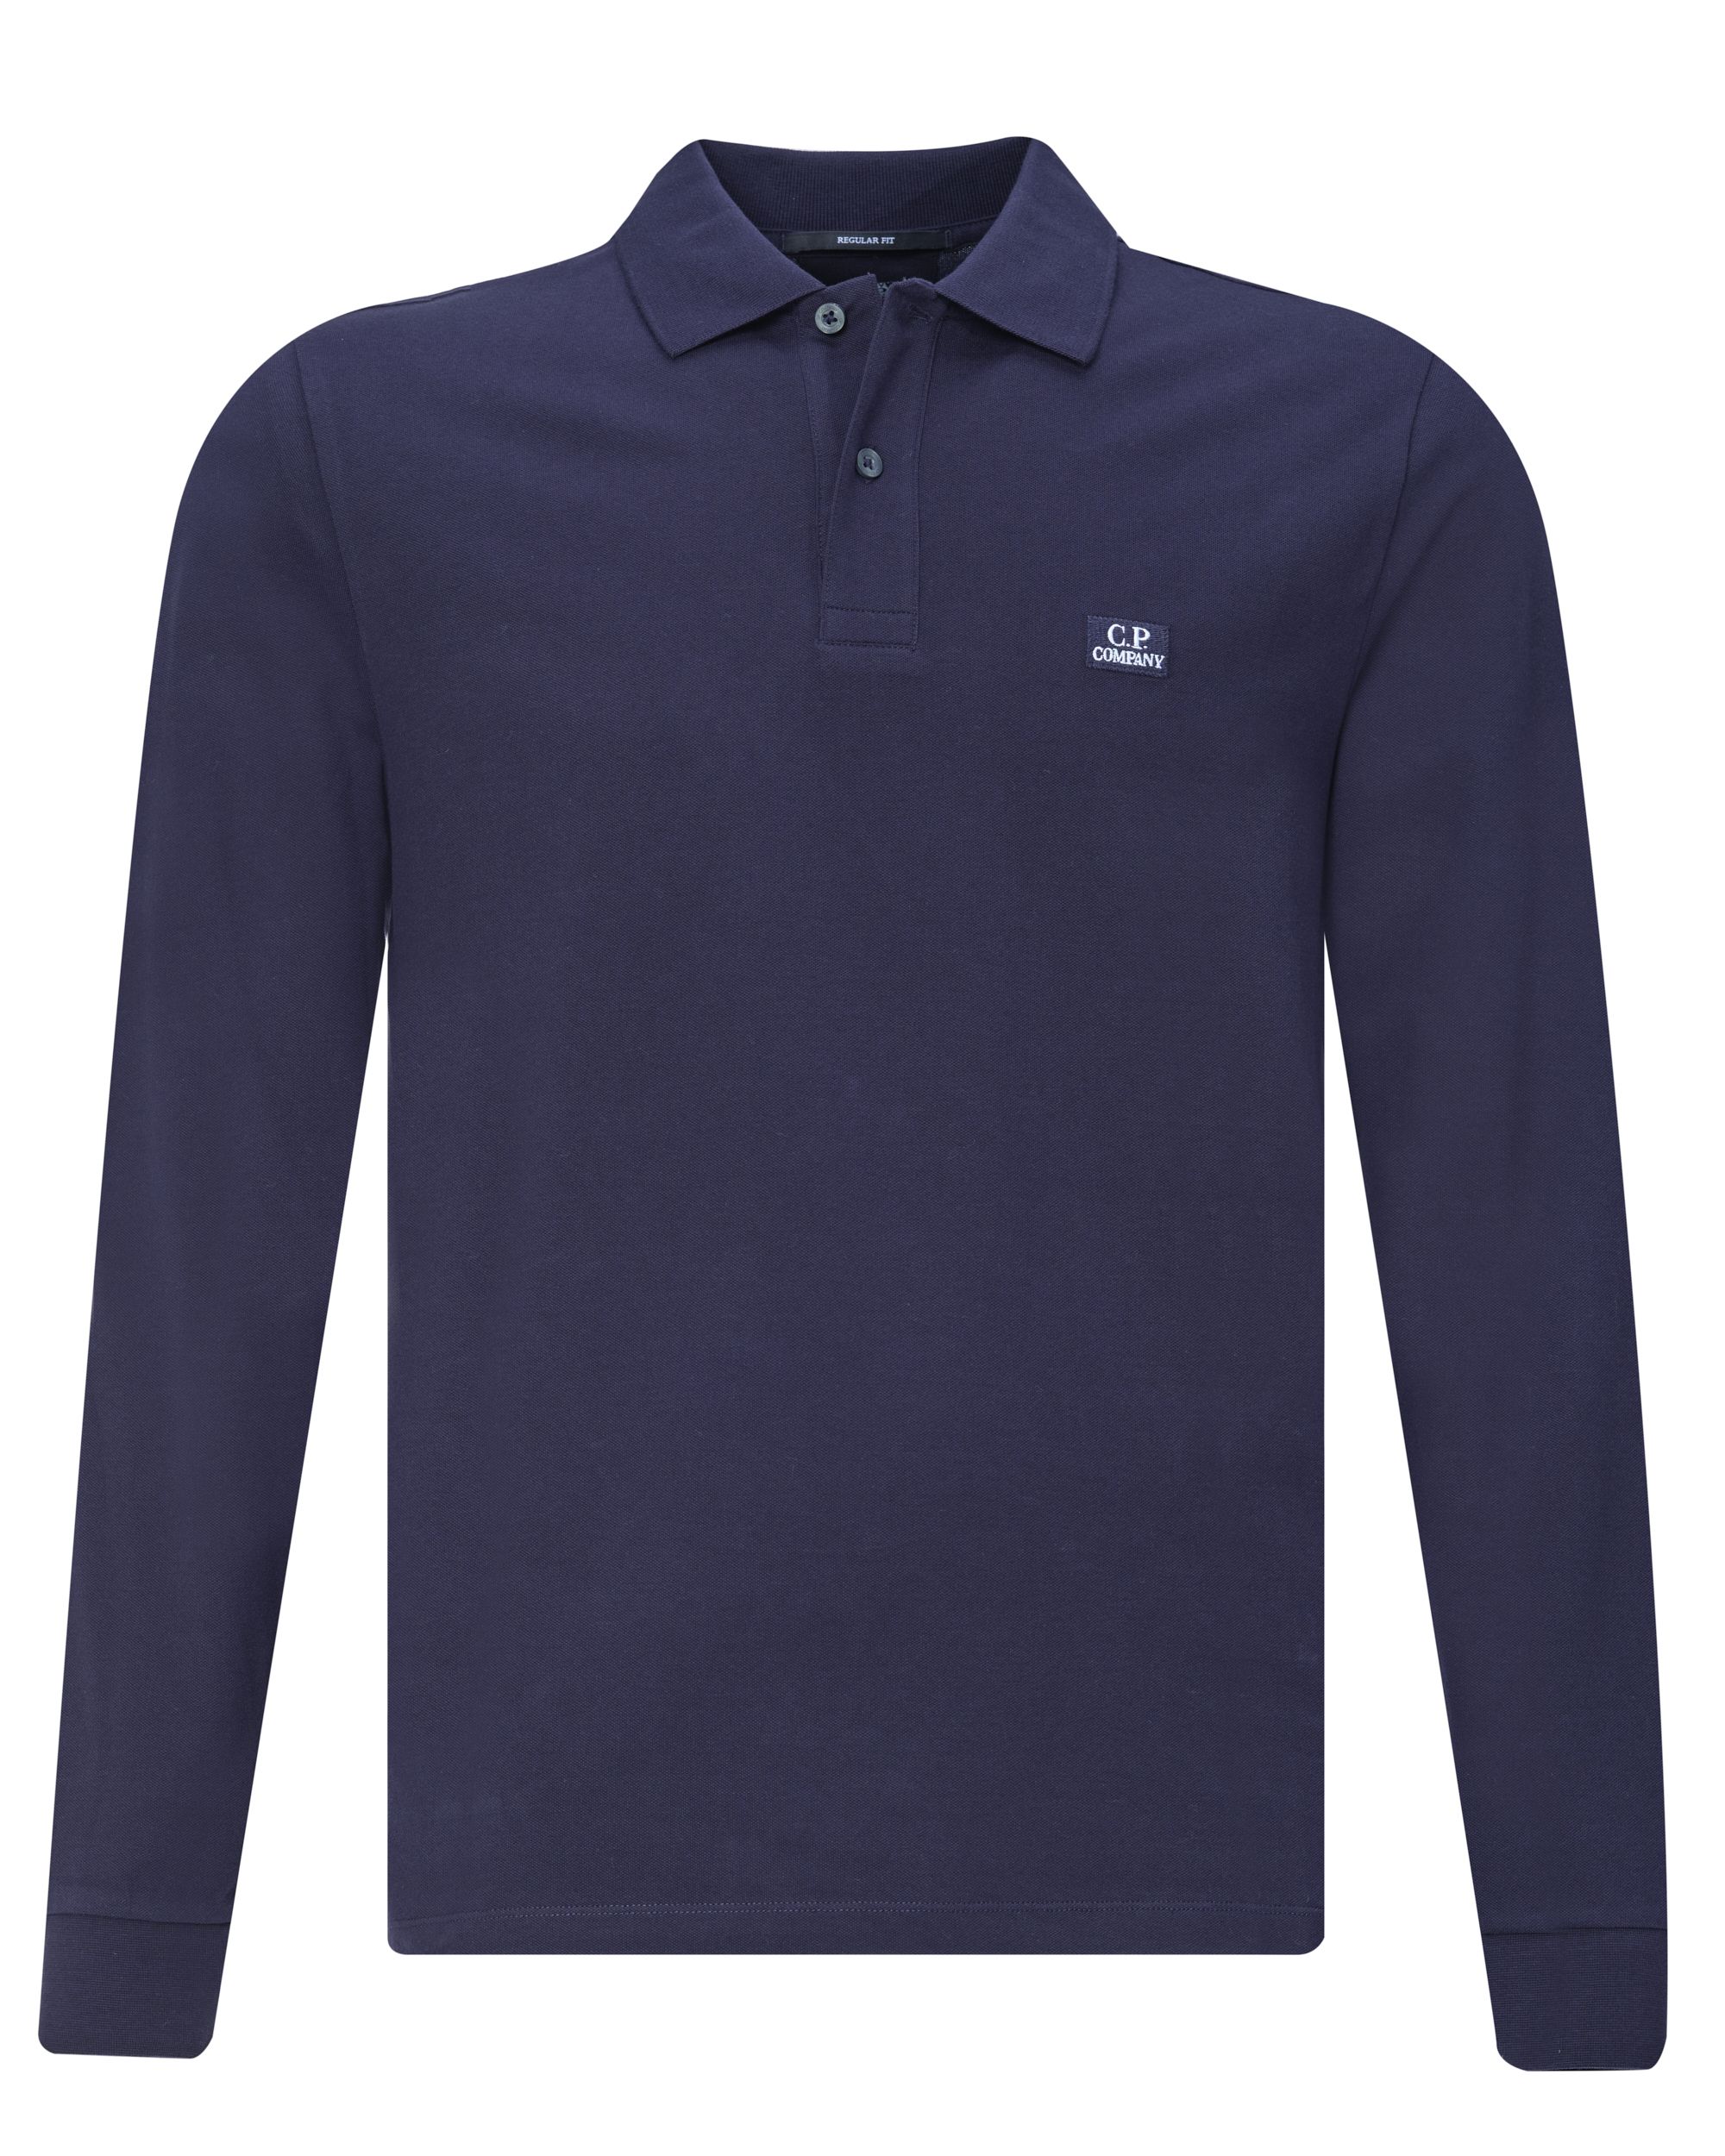 C.P Company Polo LM Donker blauw 078725-002-L